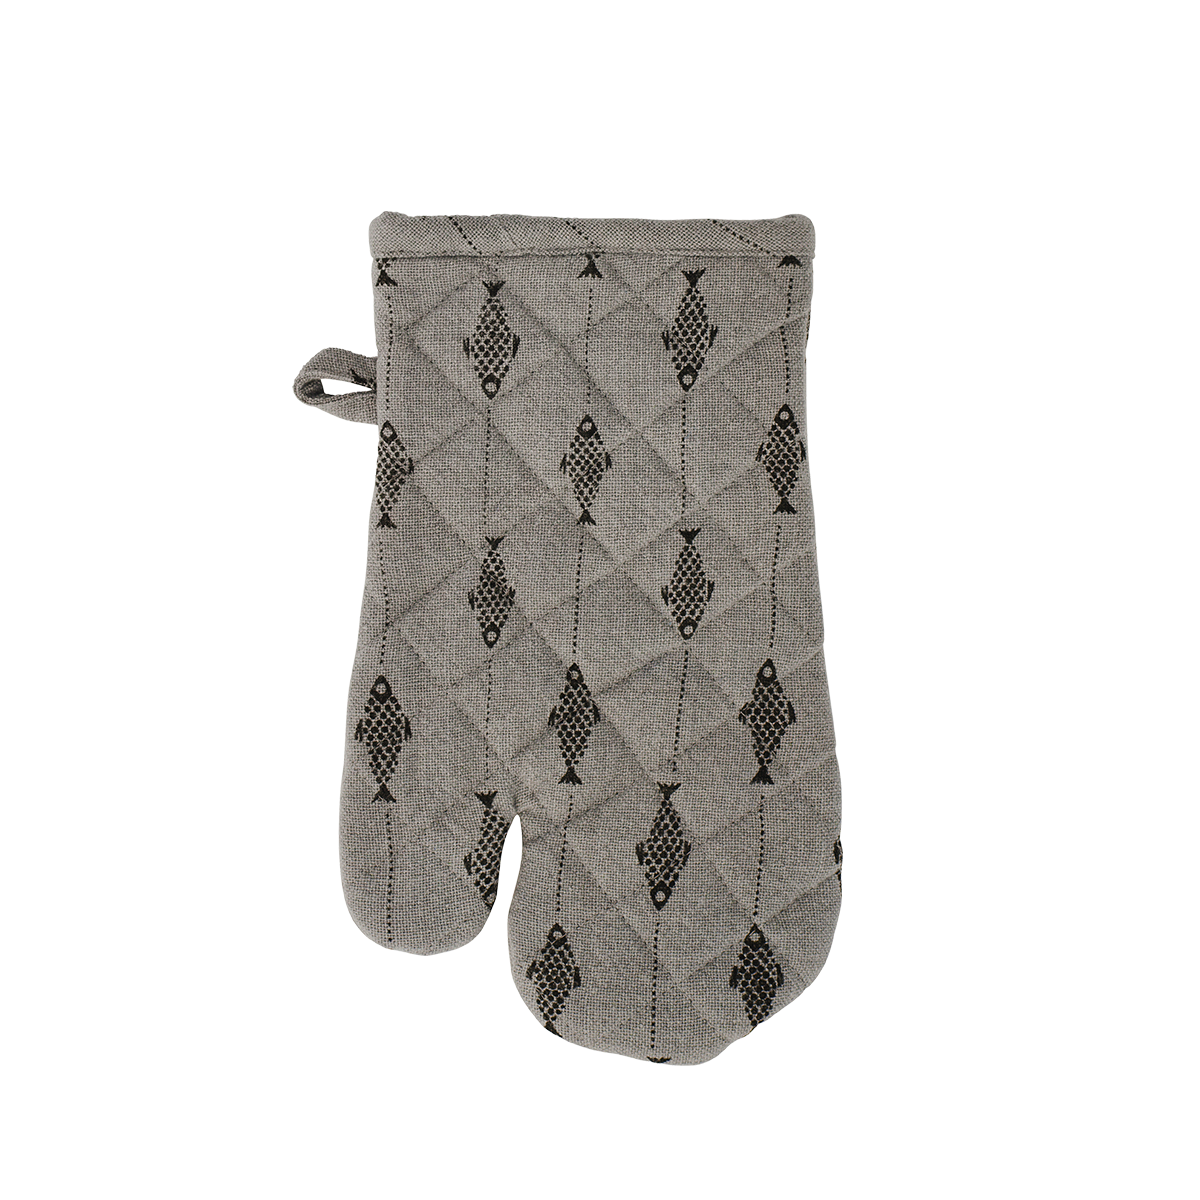 Quilted oven mitt